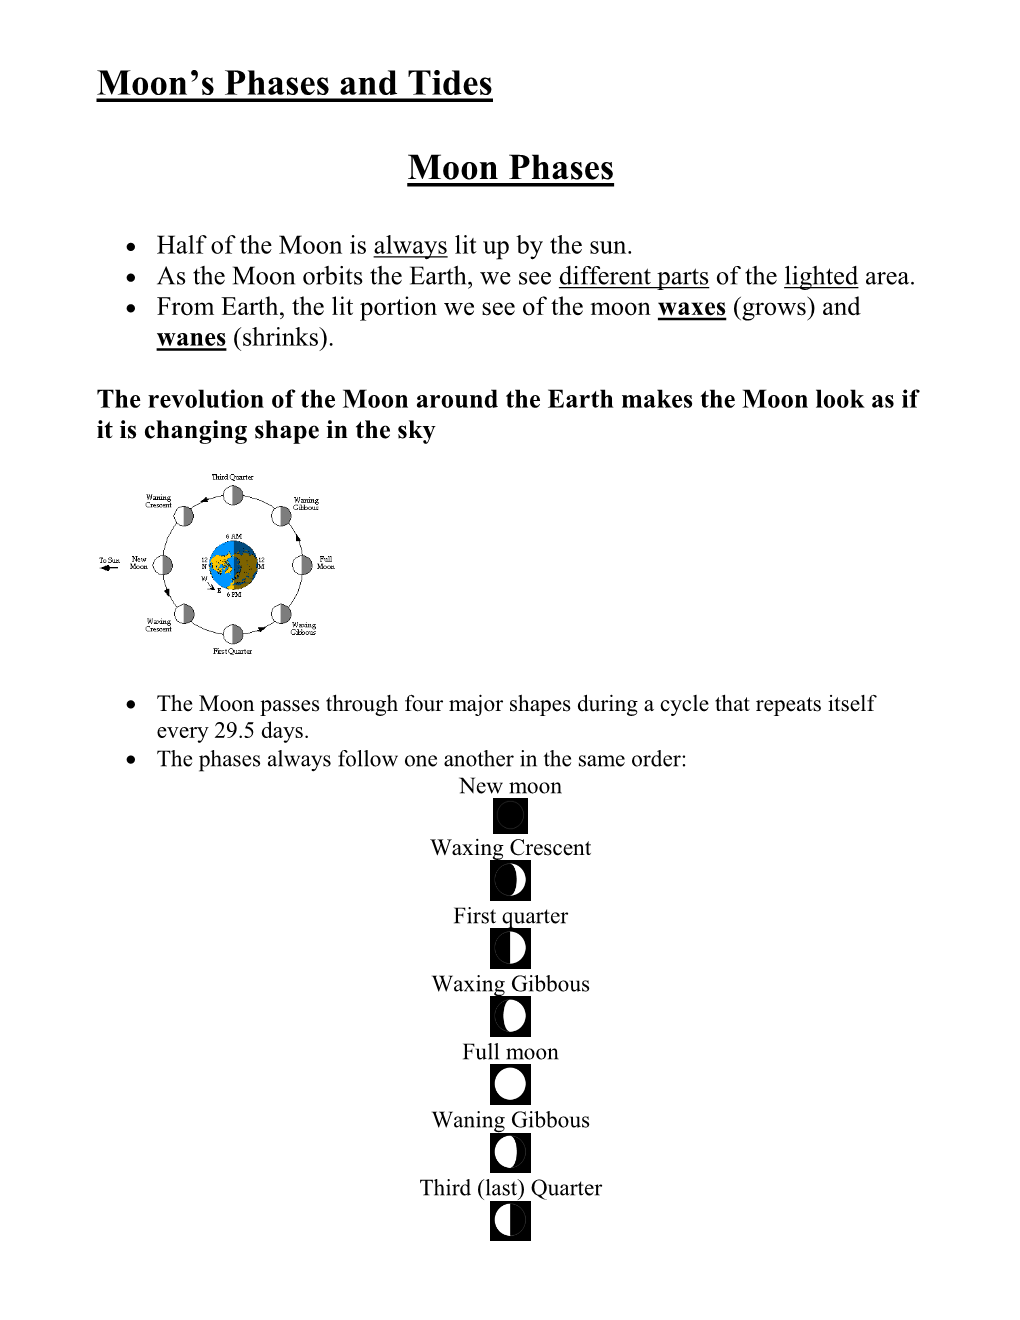 Moons Phases and Tides